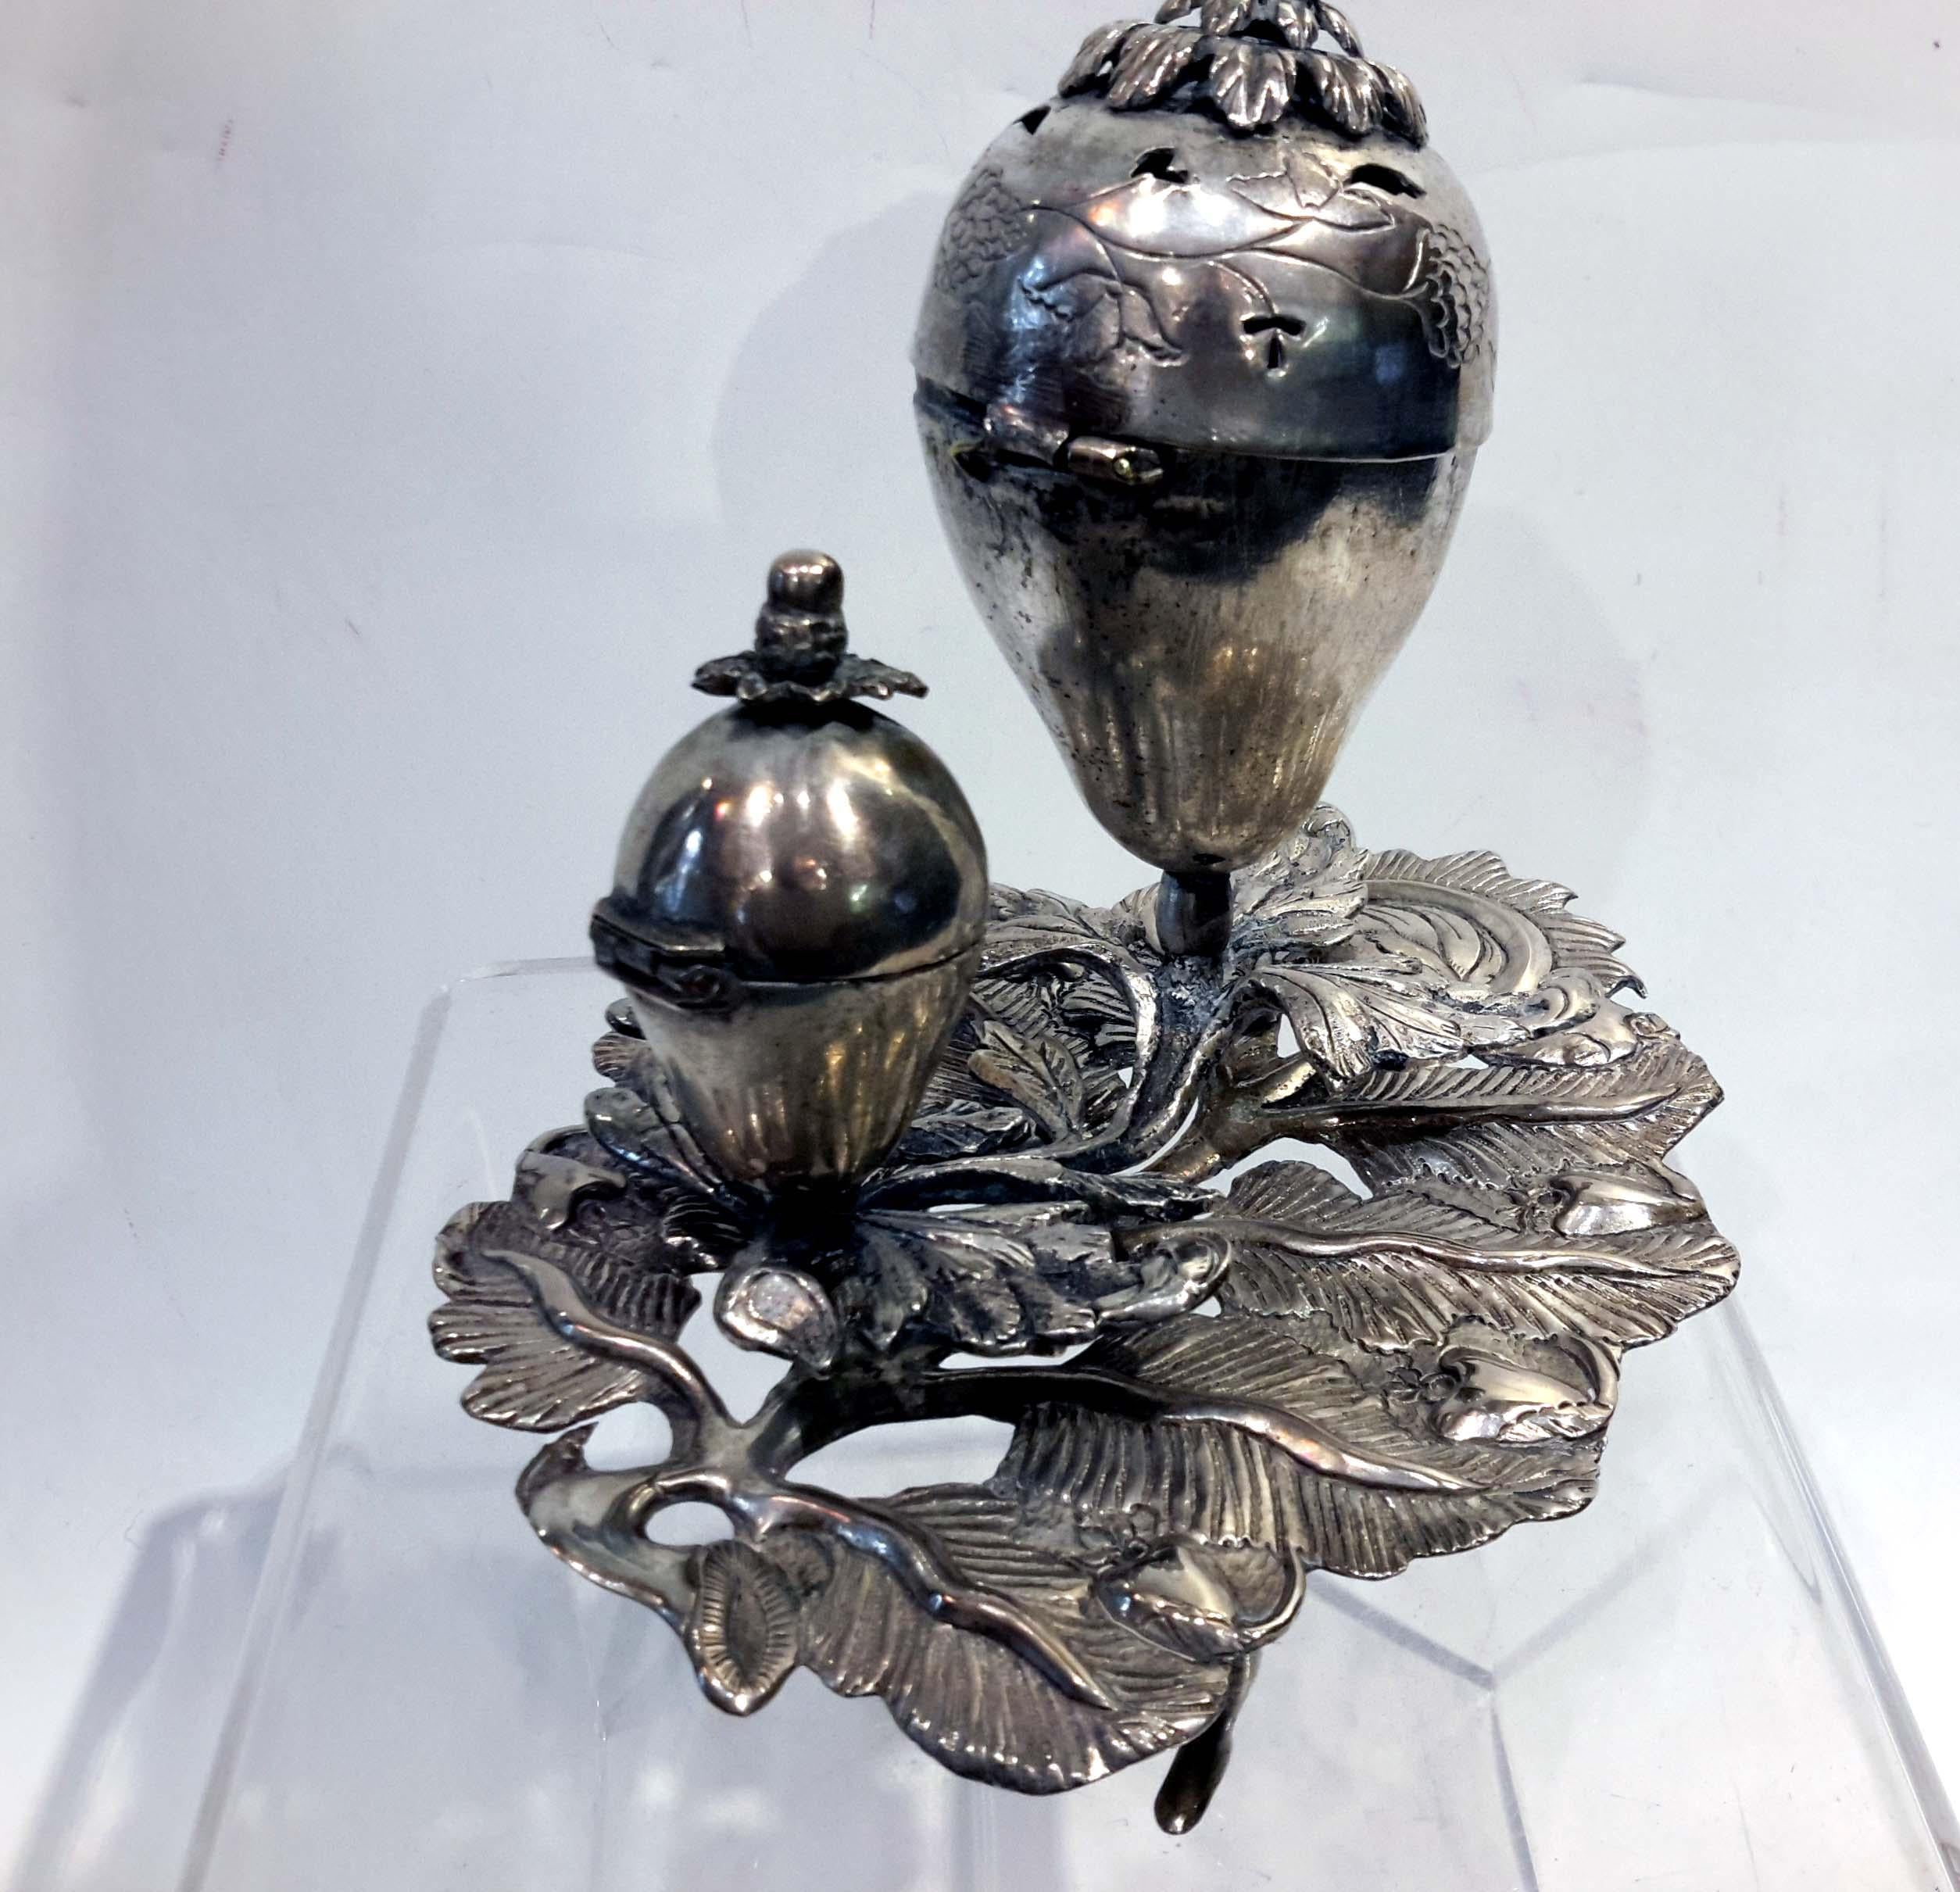 Repoussé Judaic Silver Double Spice Container, Eastern Europe, 18th-19th Century